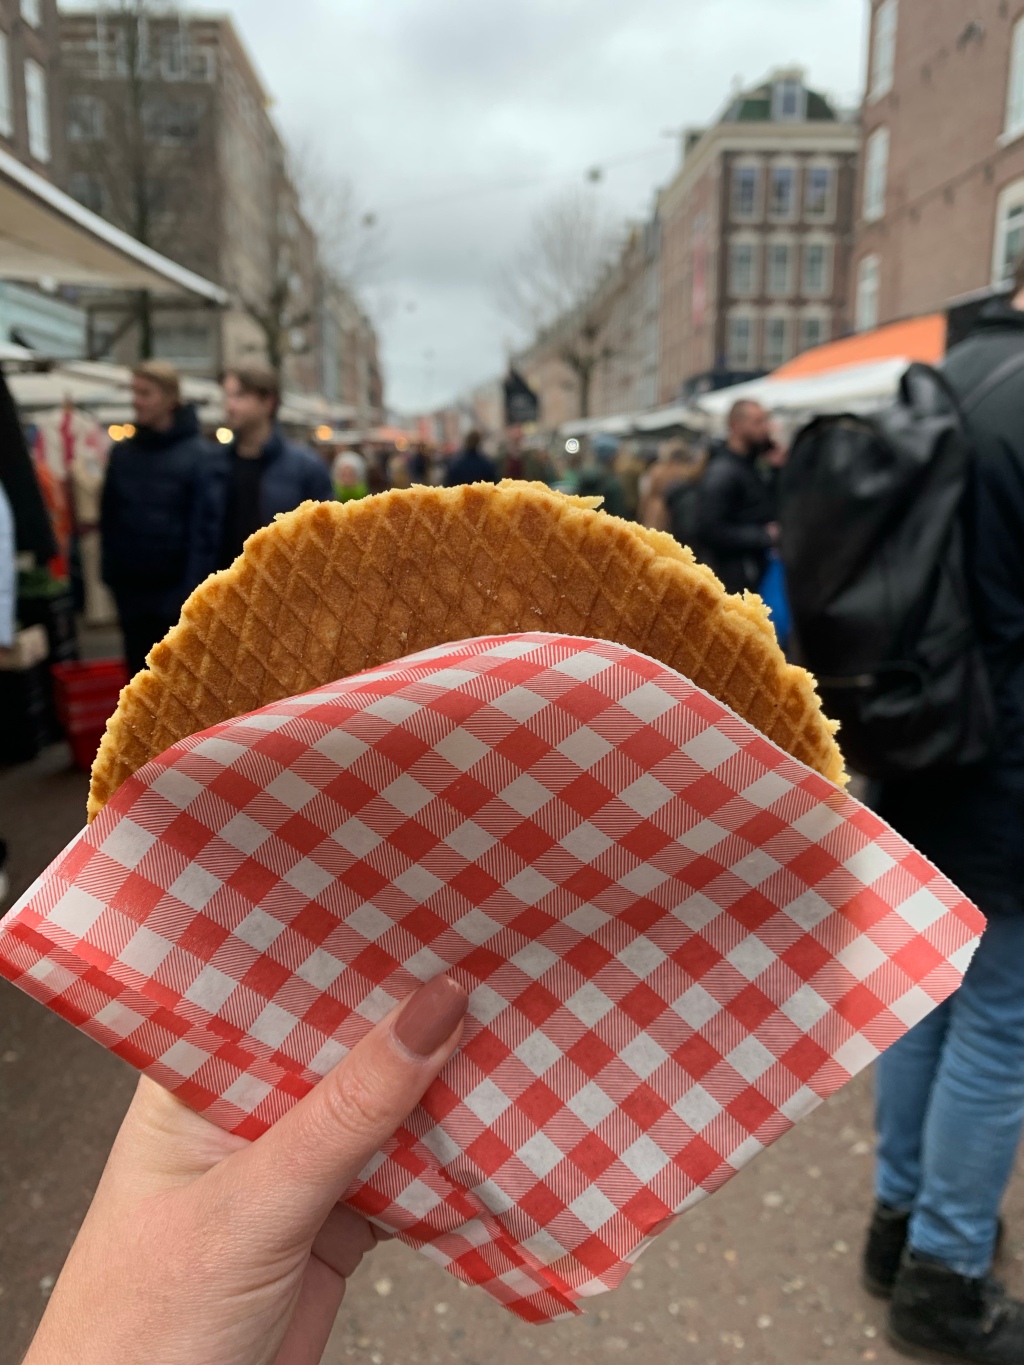 Amsterdam: 8 must try foods & where to find them